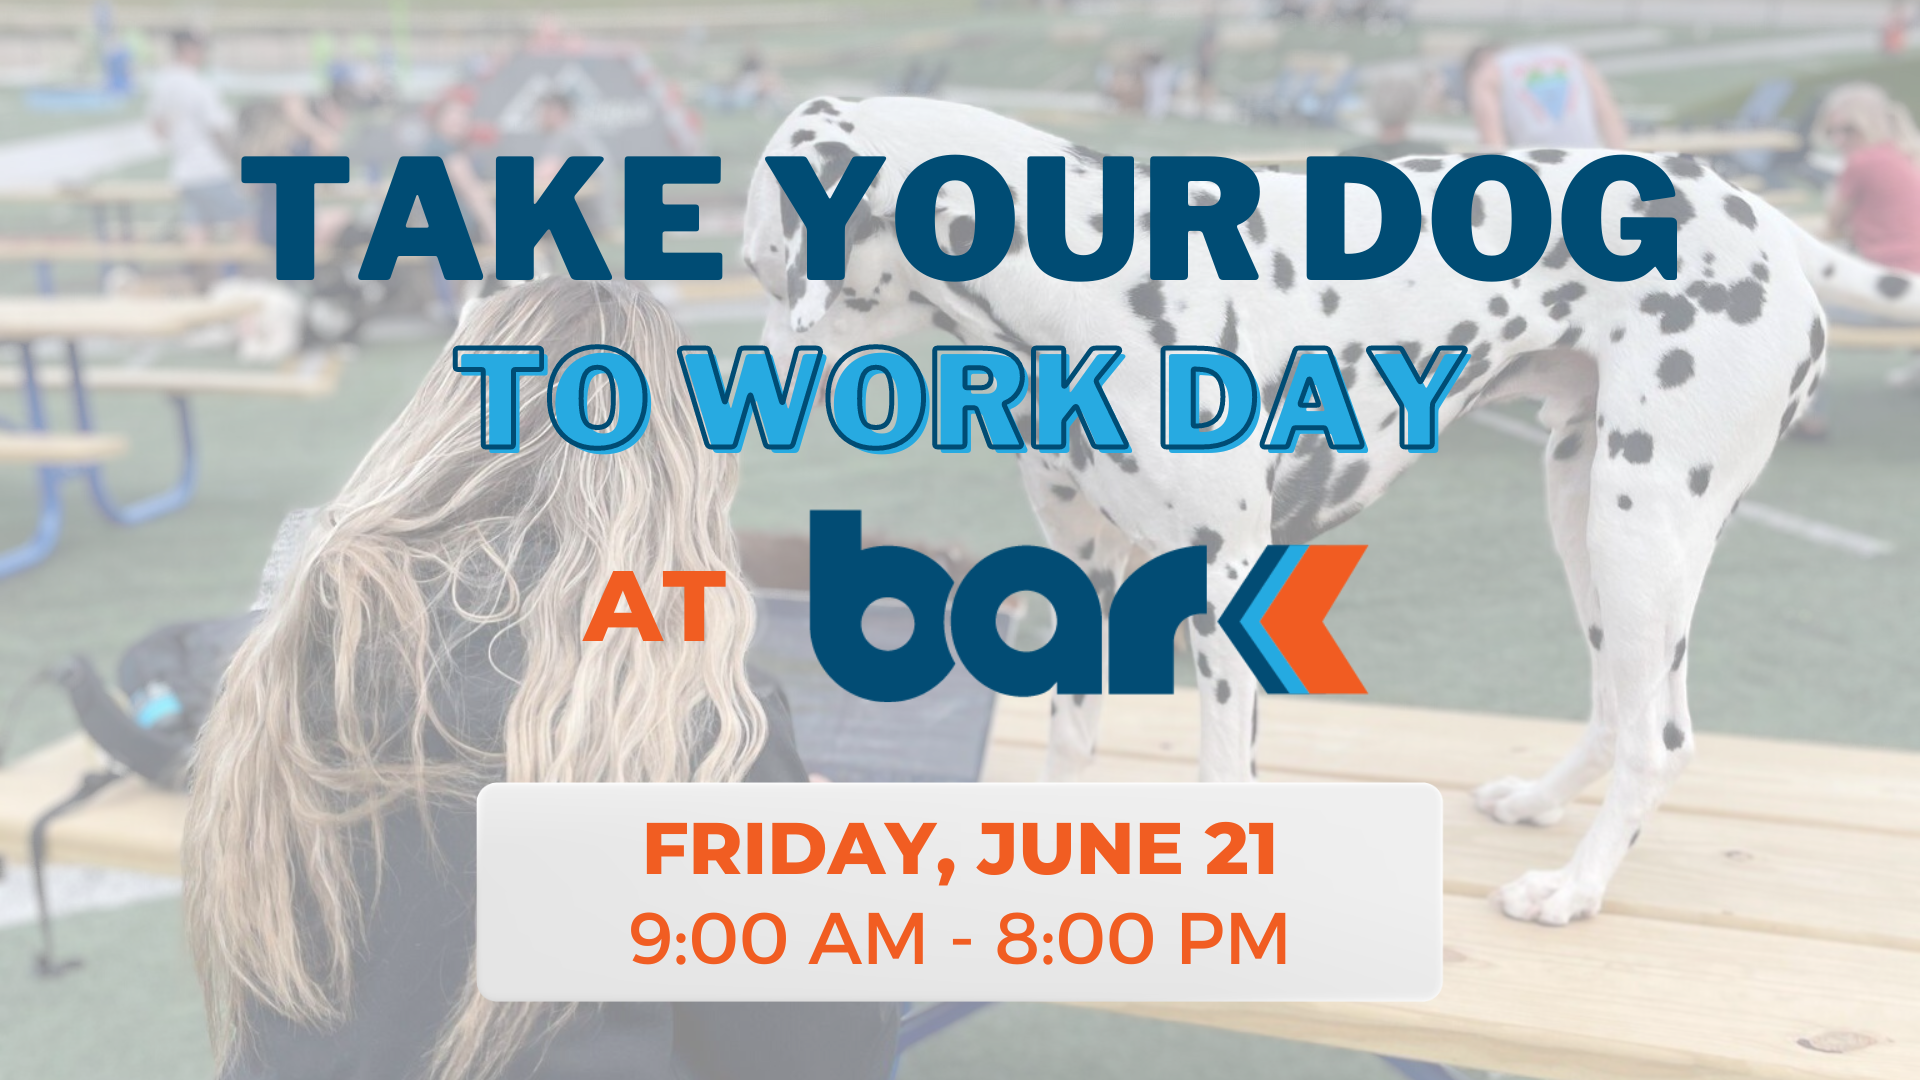 Take your dog to work day at Bar K Friday, June 21 9am to 8pm